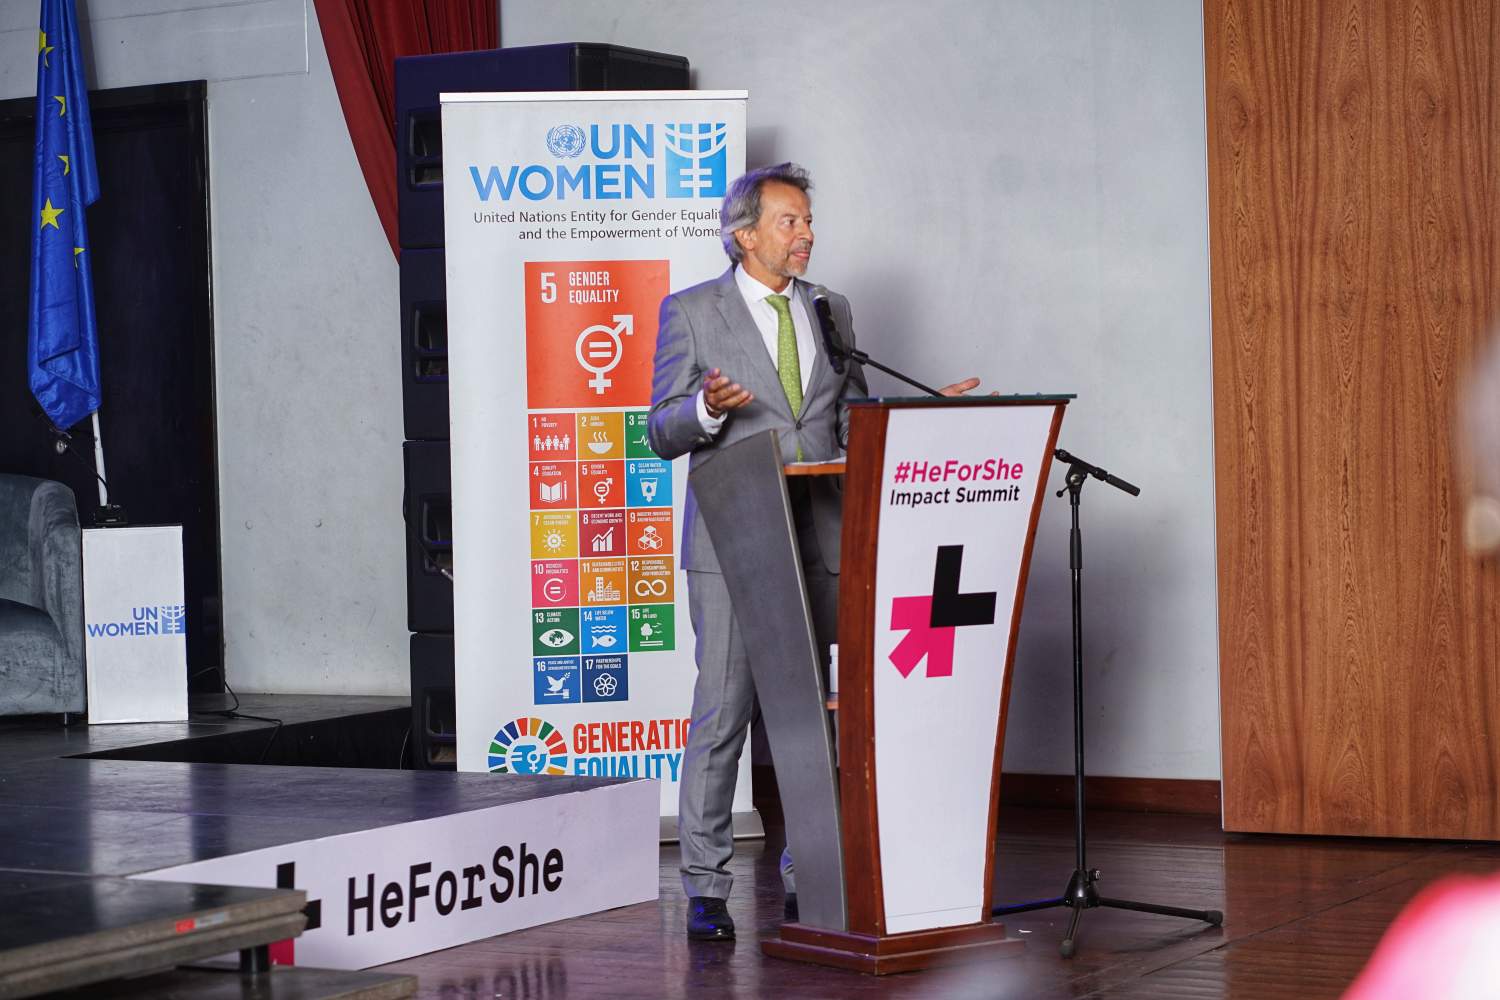 #HeforShe champions commit to gender equality and women’s empowerment